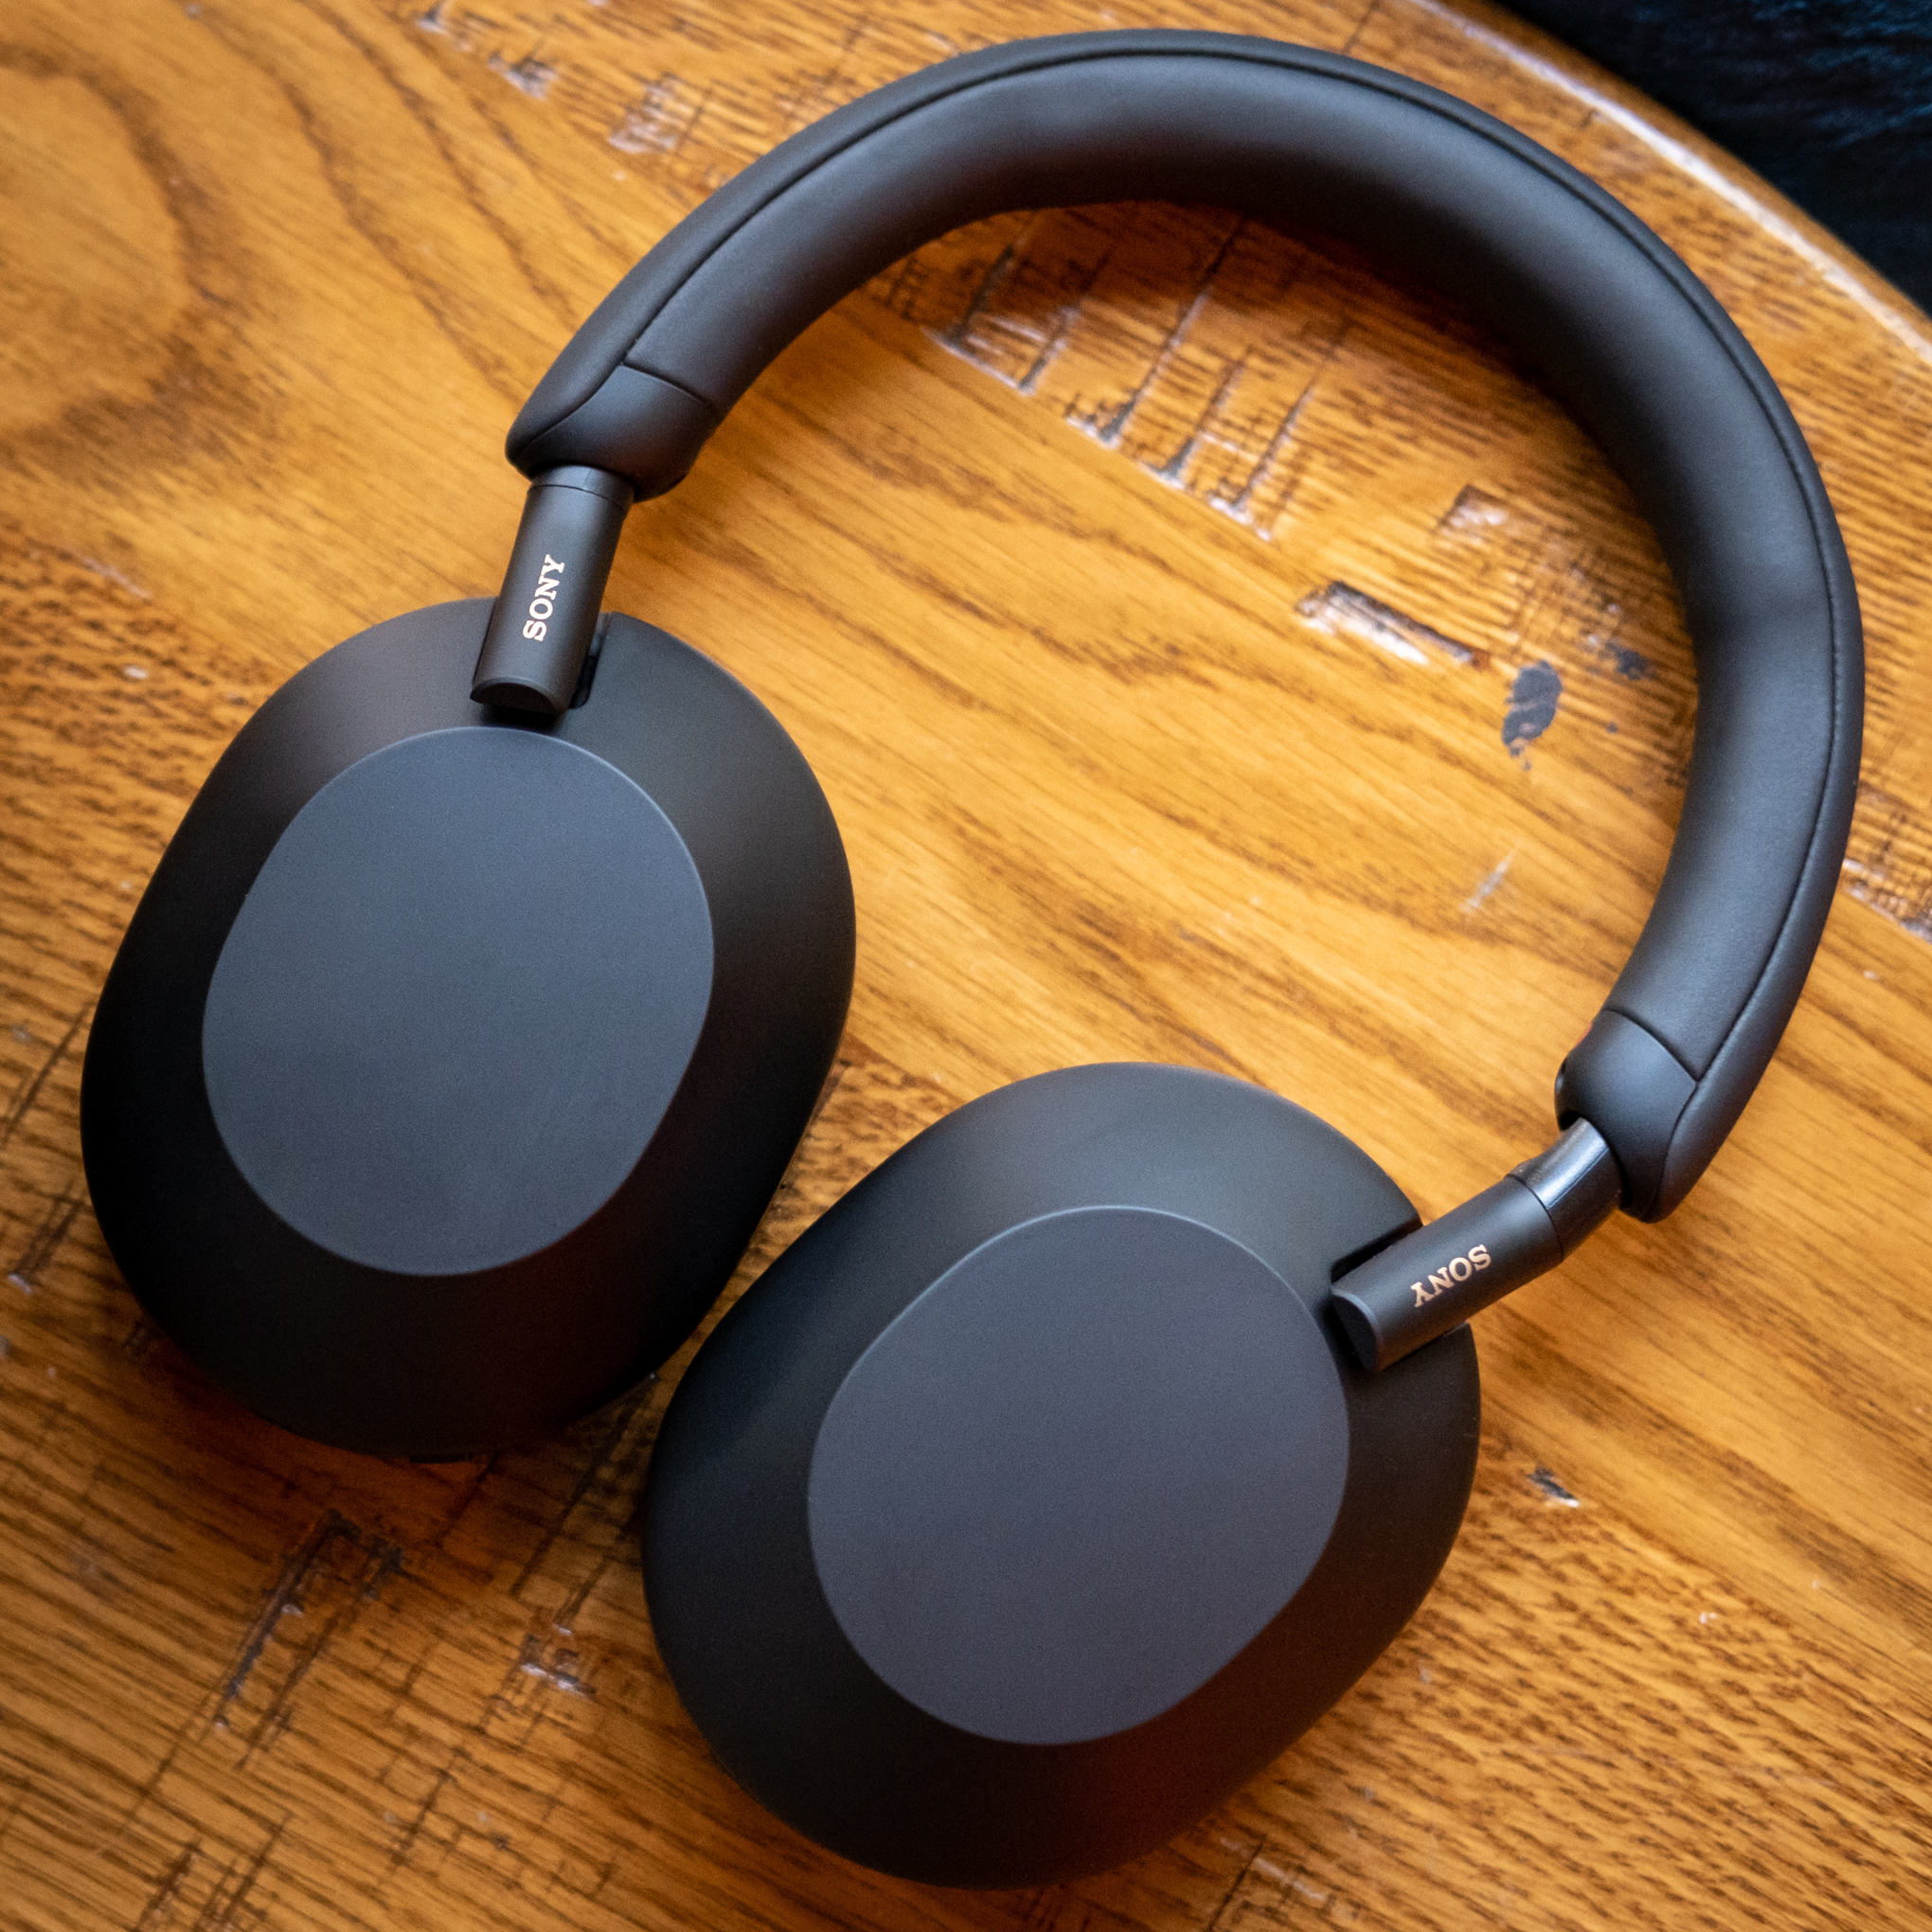 Sony WH-1000XM5 review: new design, new sound, new price - The Verge